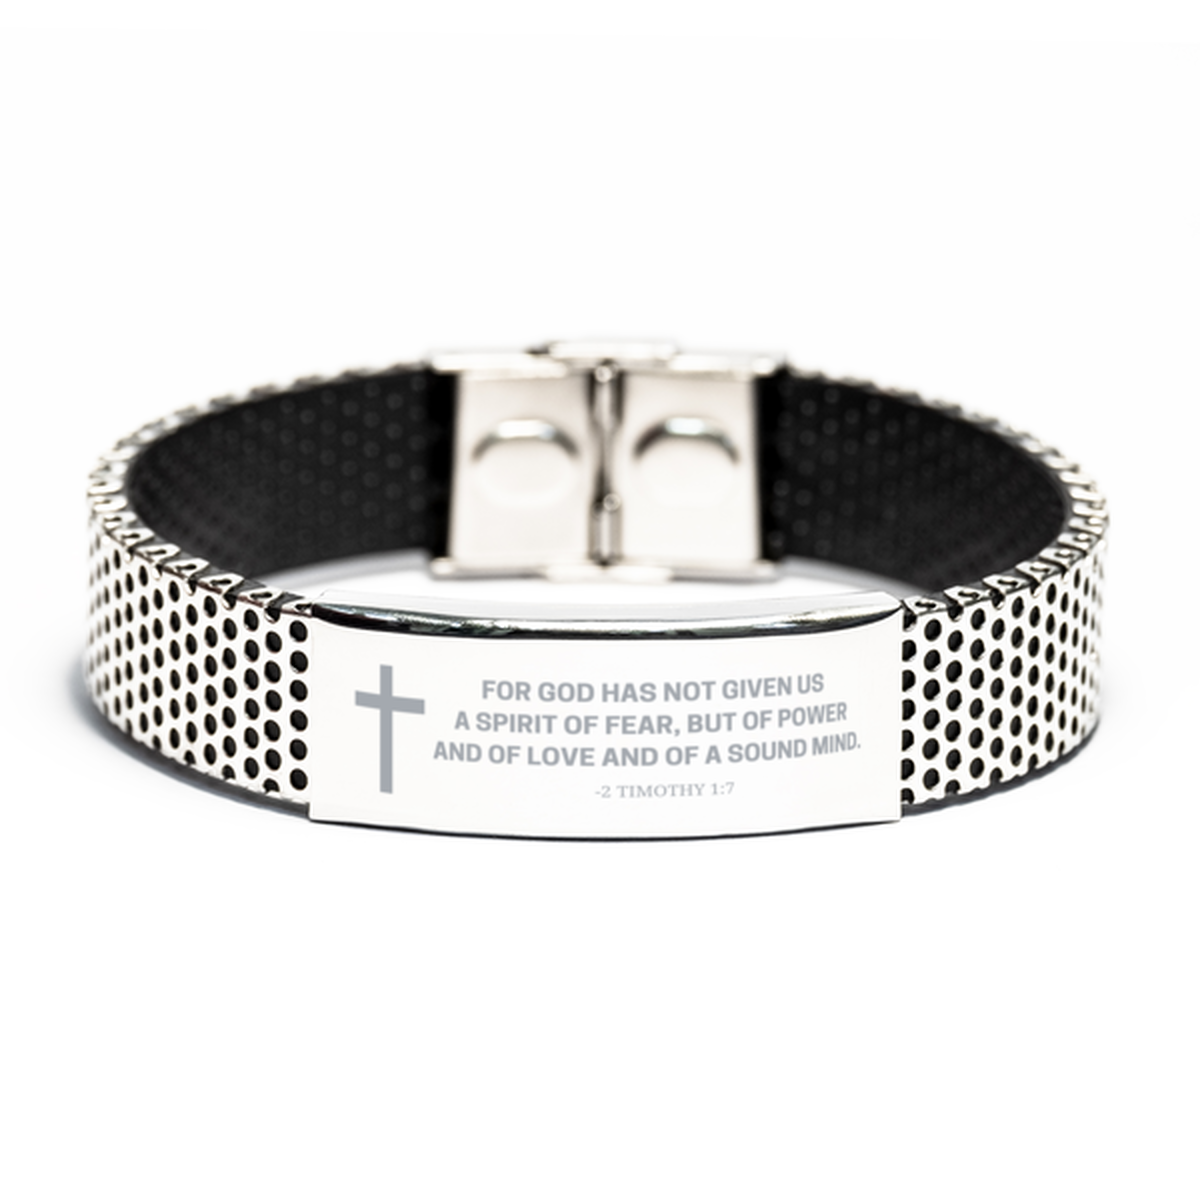 Baptism Gifts For Teenage Boys Girls, Christian Bible Verse Stainless Steel Bracelet, For God has not given us, Catholic Confirmation Gifts for Son, Godson, Grandson, Nephew